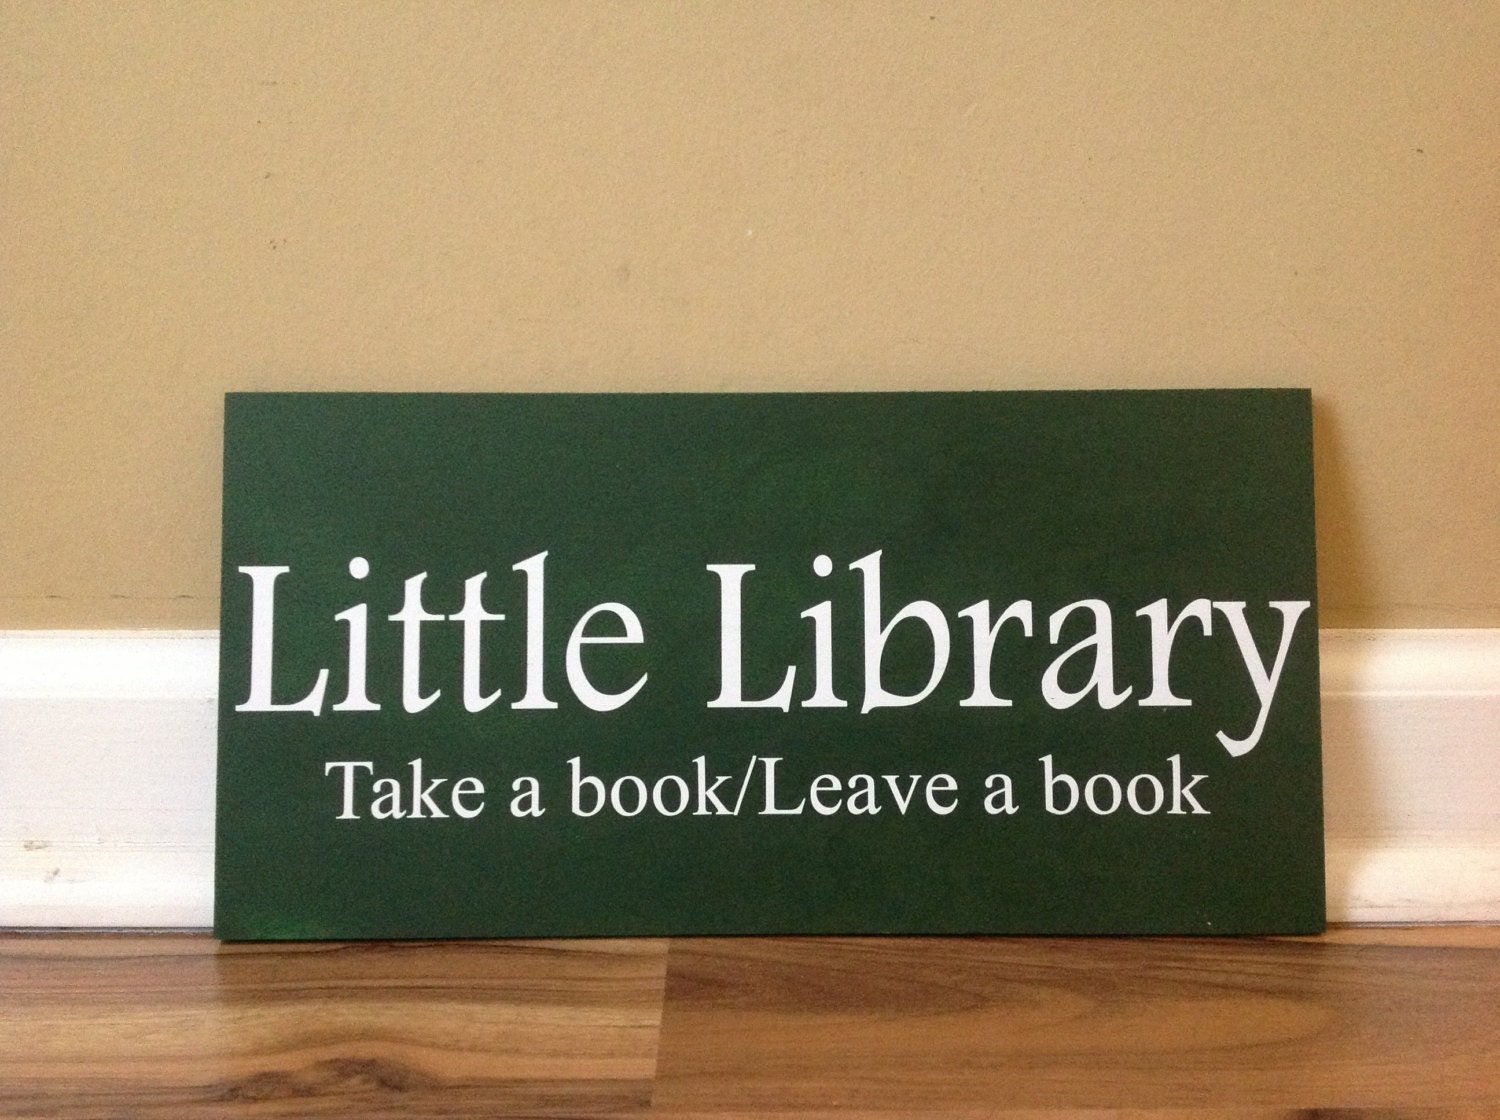 little-library-take-a-book-leave-a-book-free-library-sign